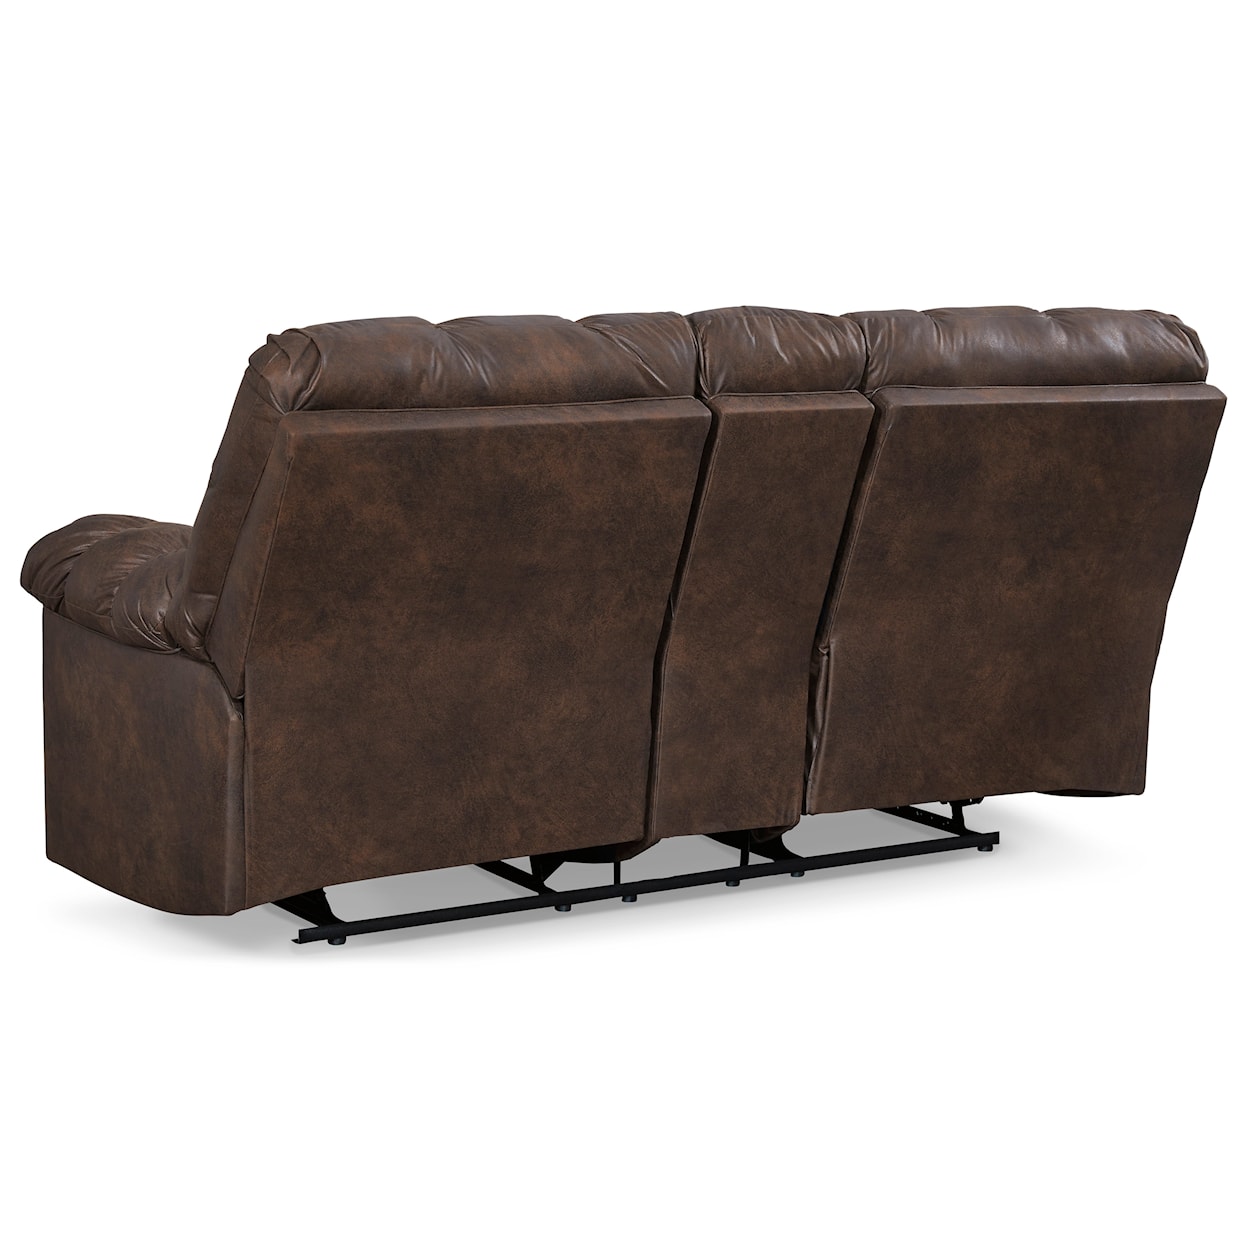 Benchcraft Derwin Reclining Loveseat with Console